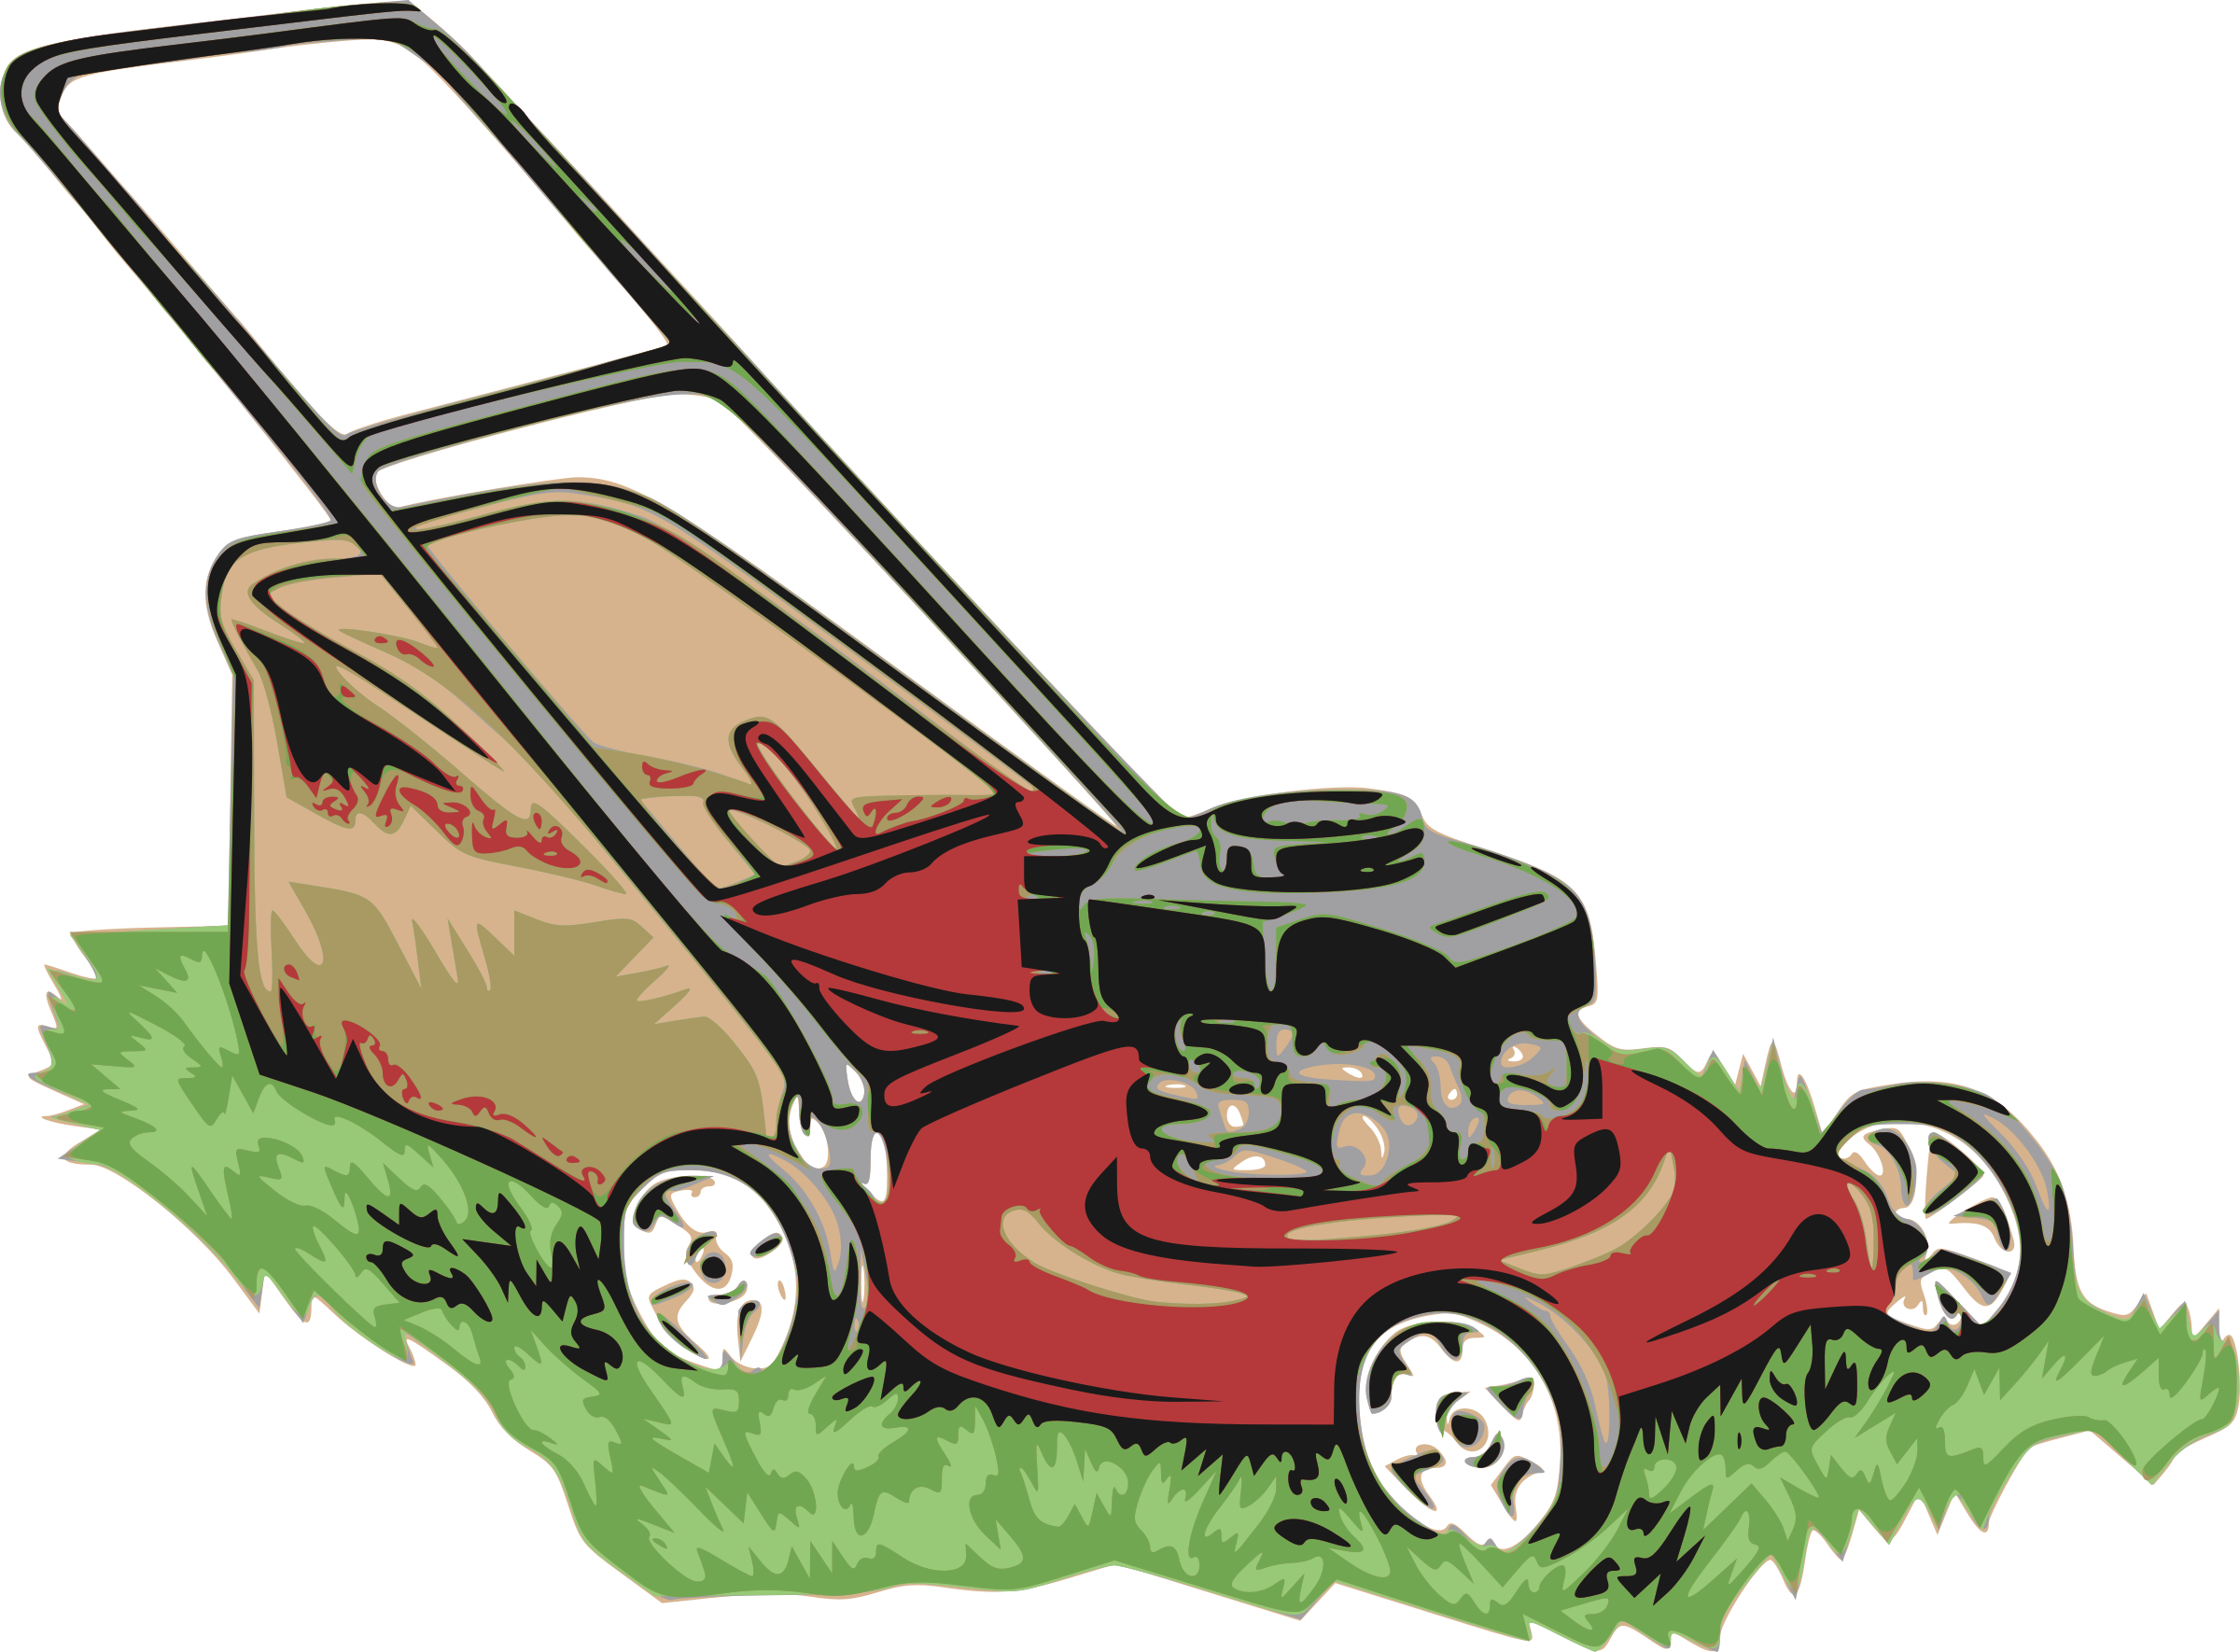 Displaying 20 Images For Lawn - Lawn Mower Pictures Clip Art